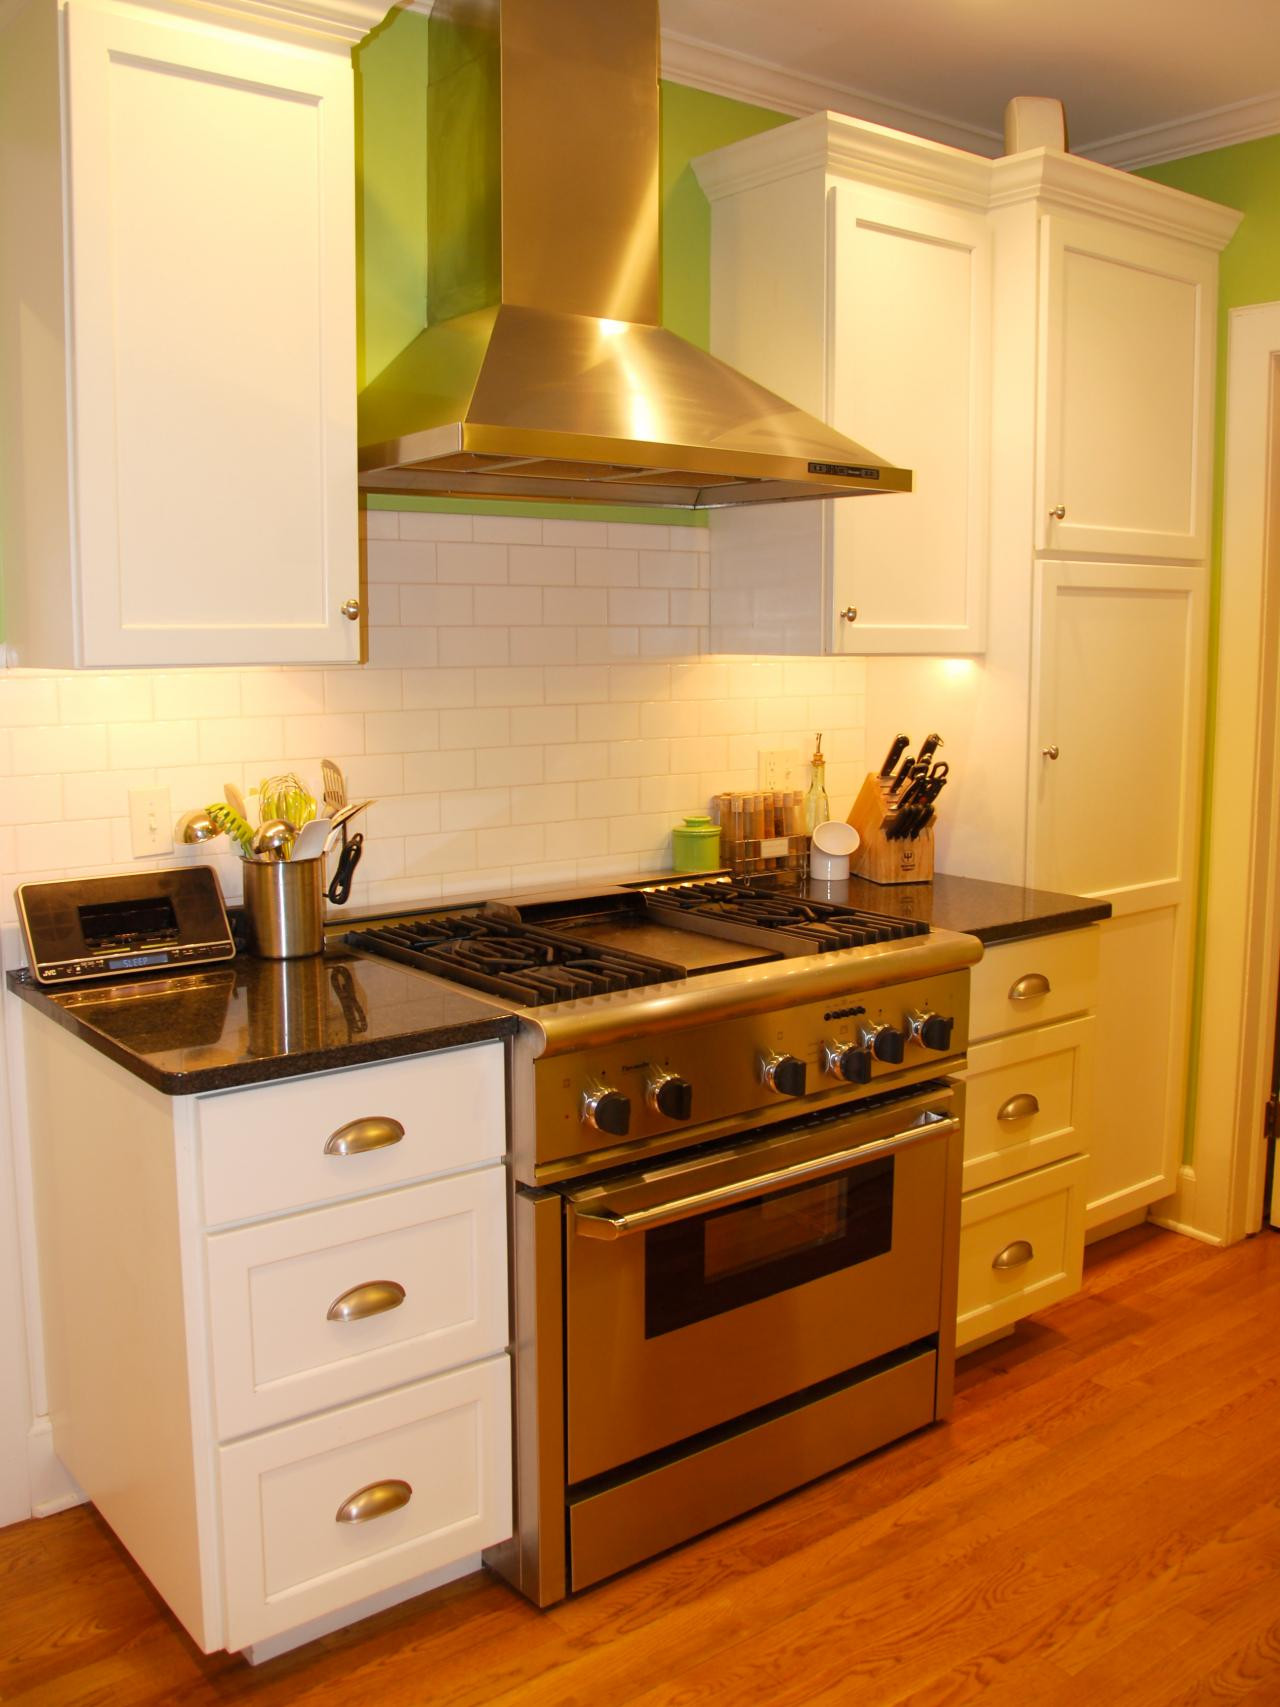 Small Kitchen Paint Ideas
 How to Paint a Small Kitchen in a Light Color Interior